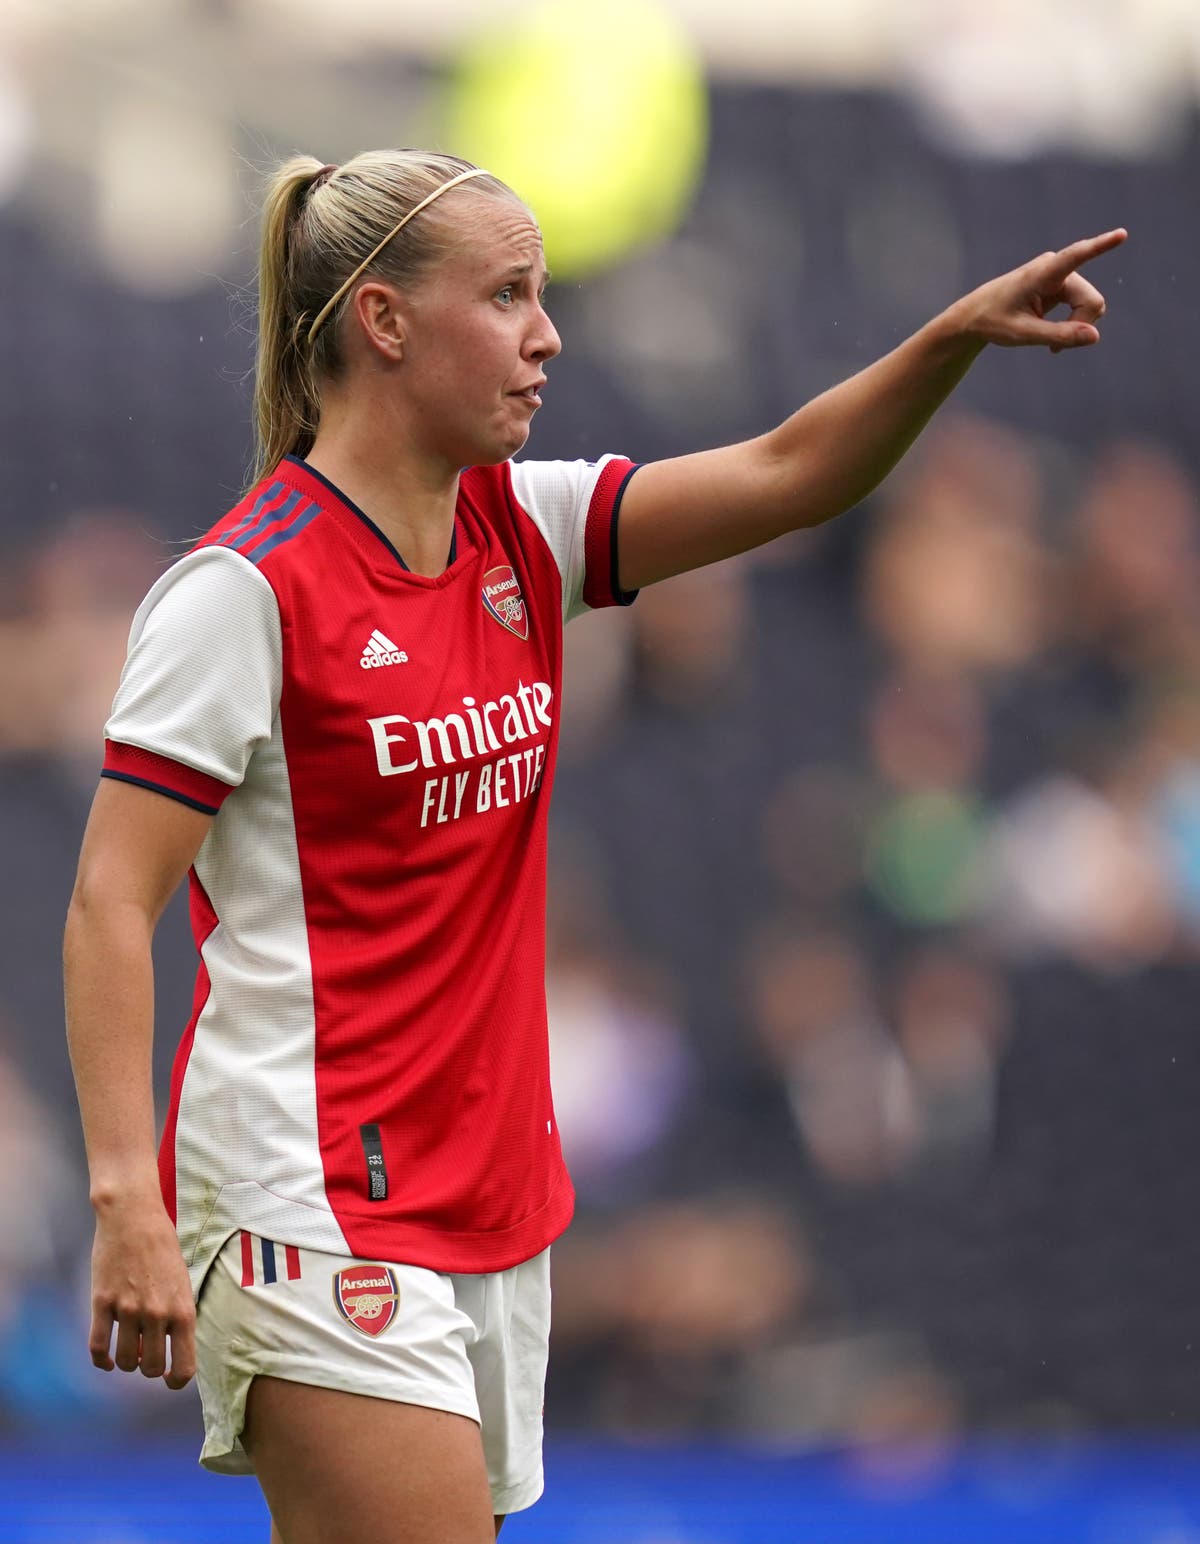 Beth Mead double helps Arsenal down defending WSL champions Chelsea